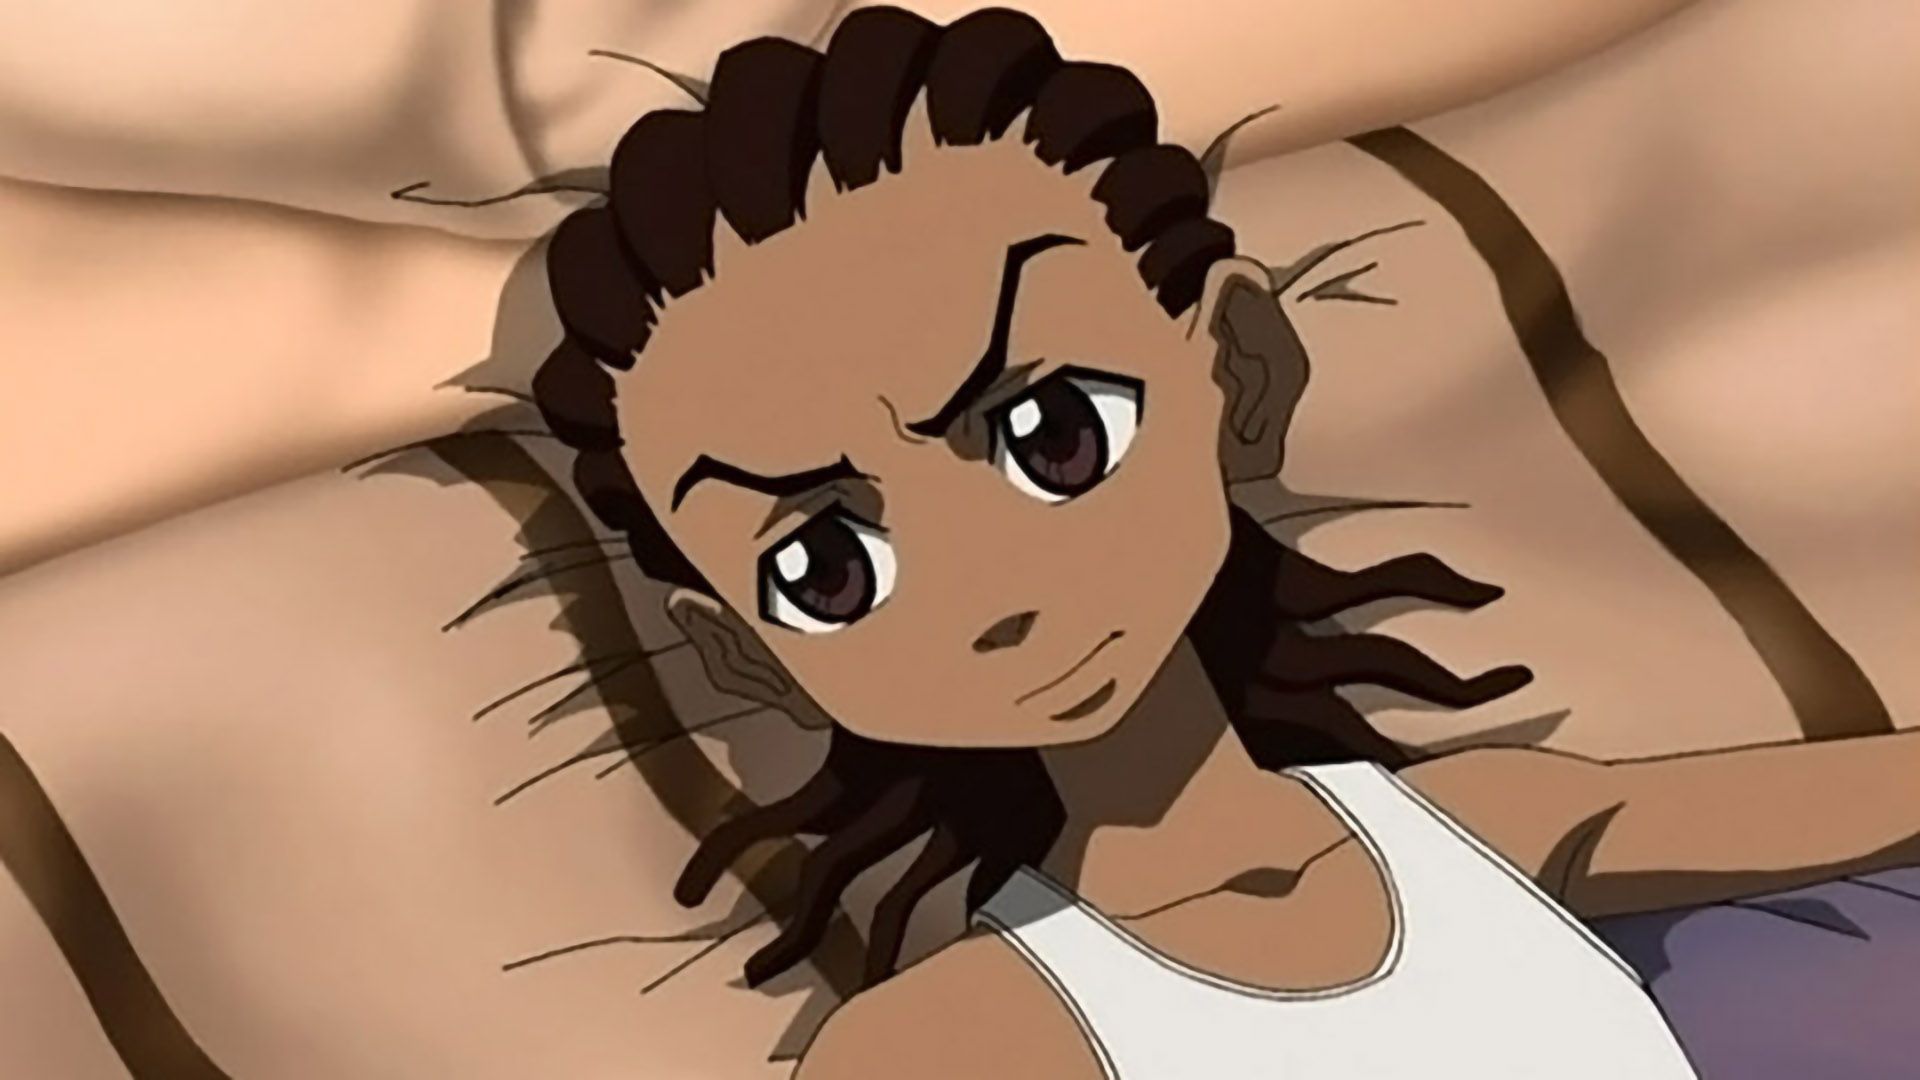 Inspecting the Animation Style of 'The Boondocks'